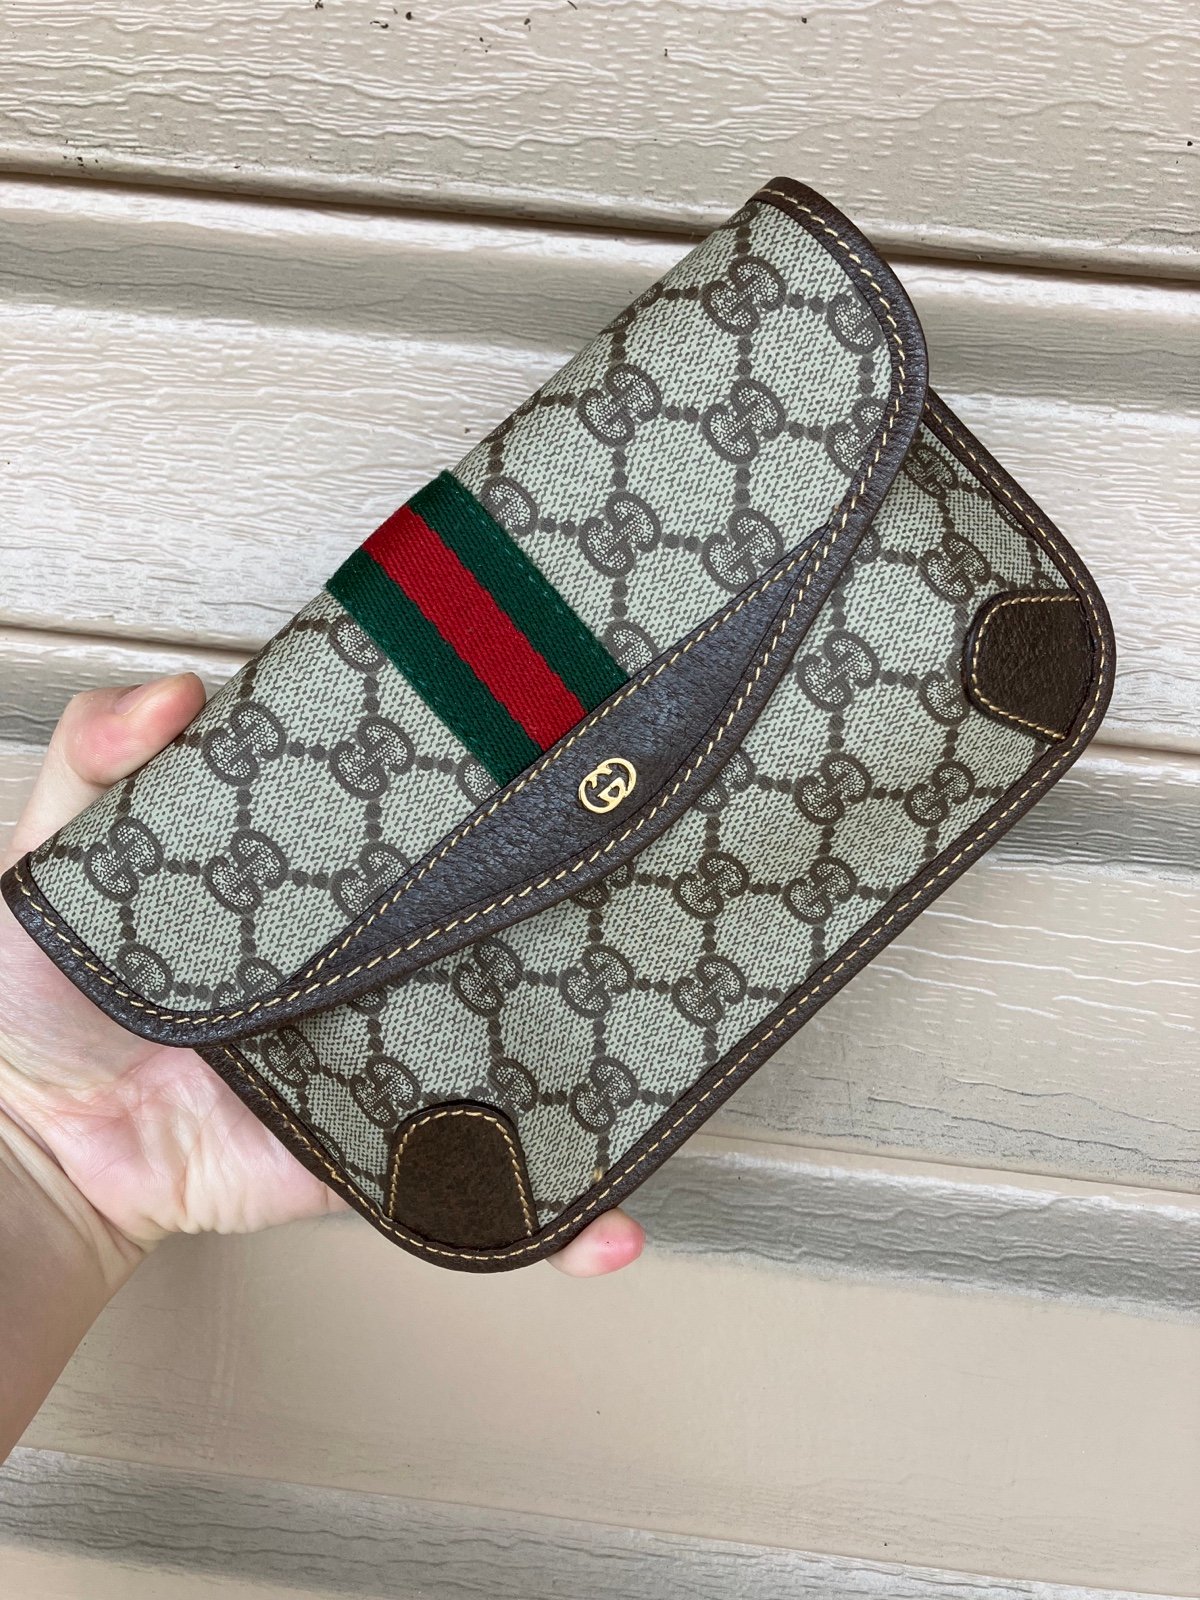 Unused Gucci GG supreme pouch / clutch / wallet 1pA0rbjg6